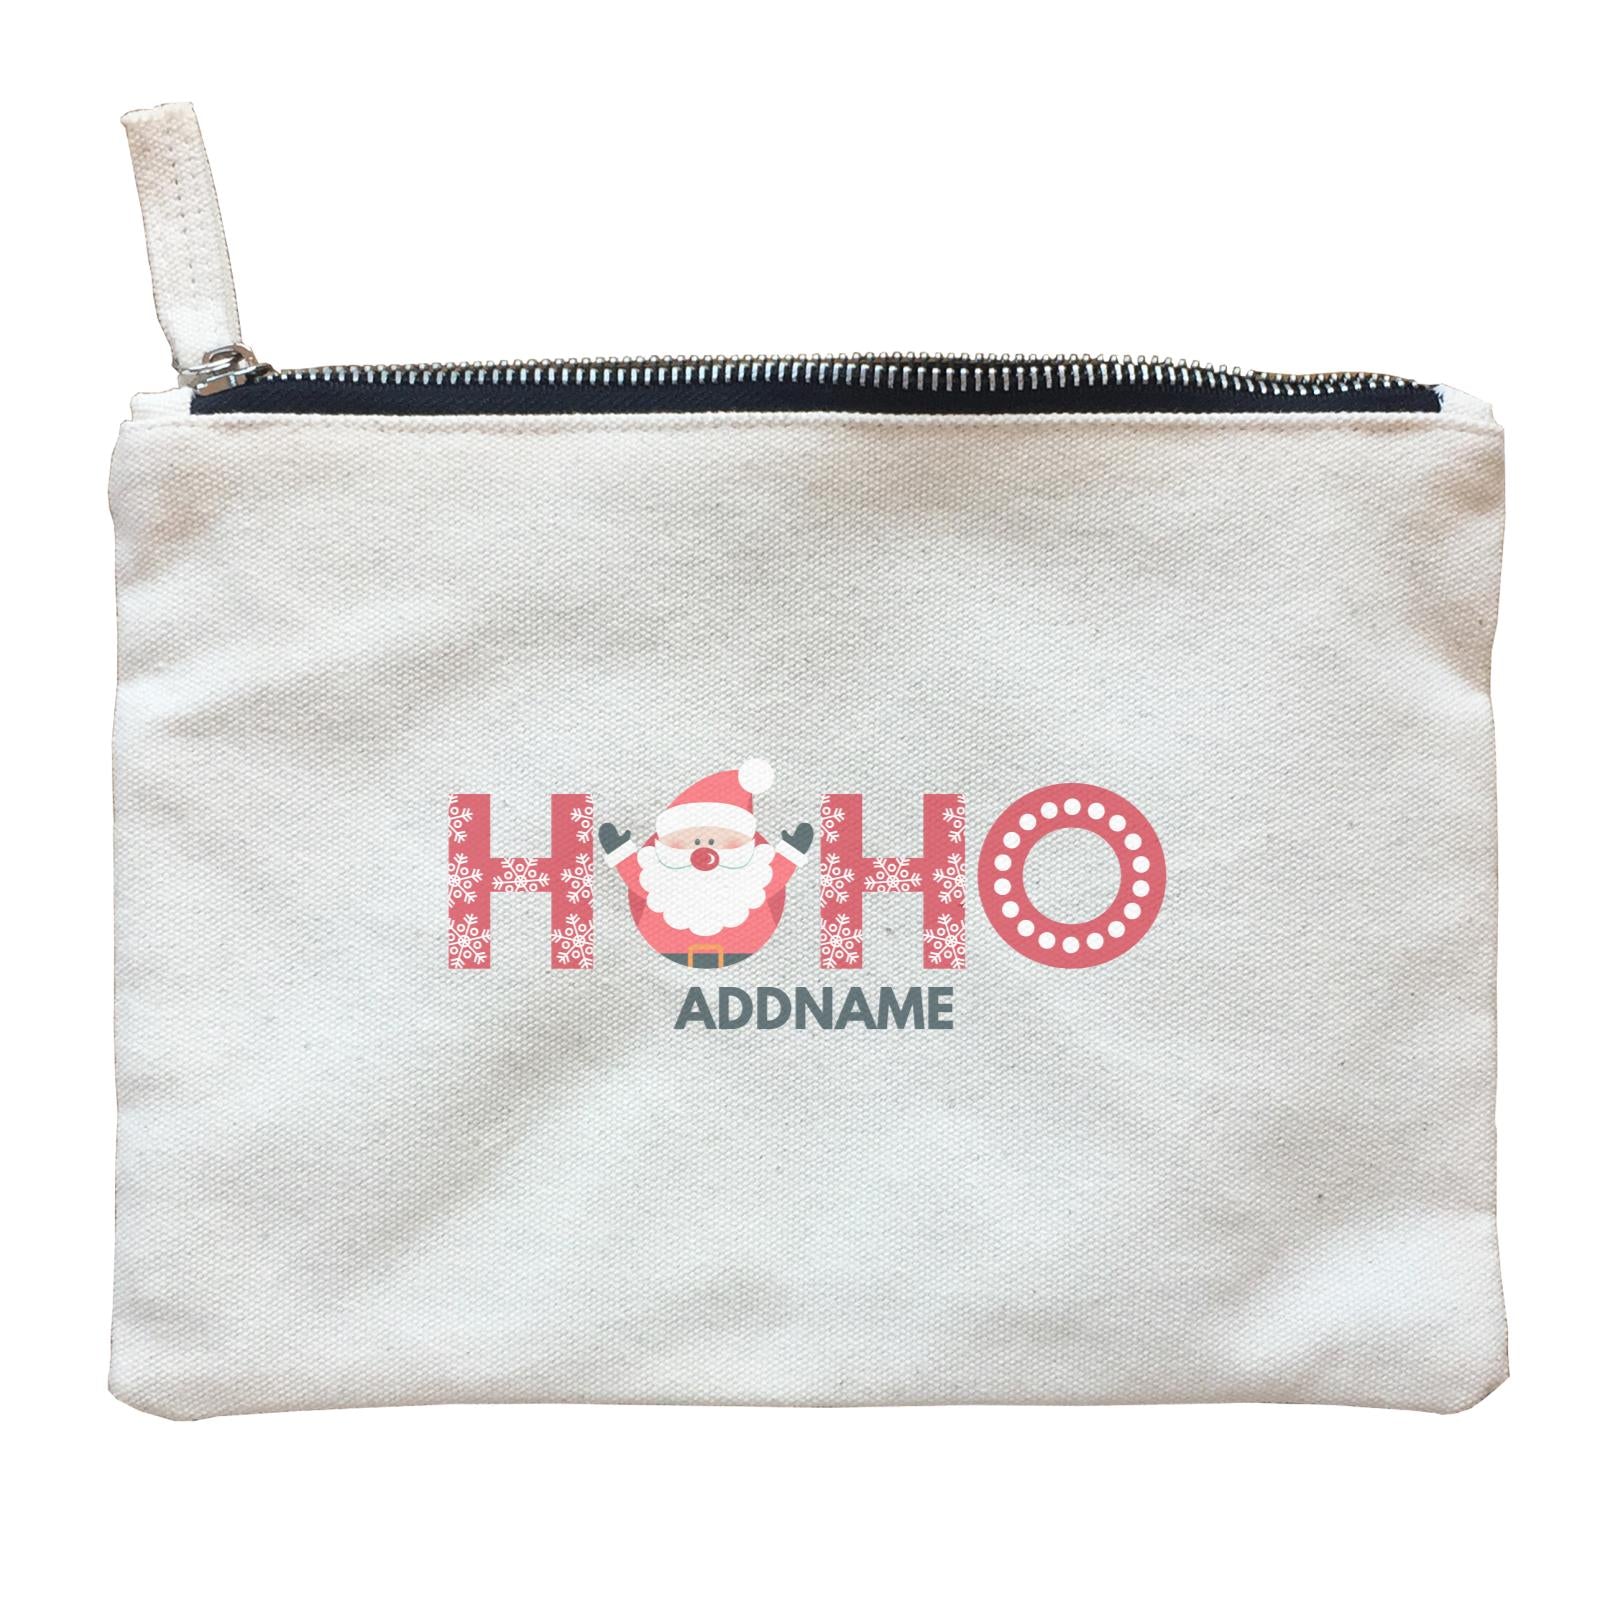 Christmas HOHO With Santa Claus Addname Accessories Zipper Pouch